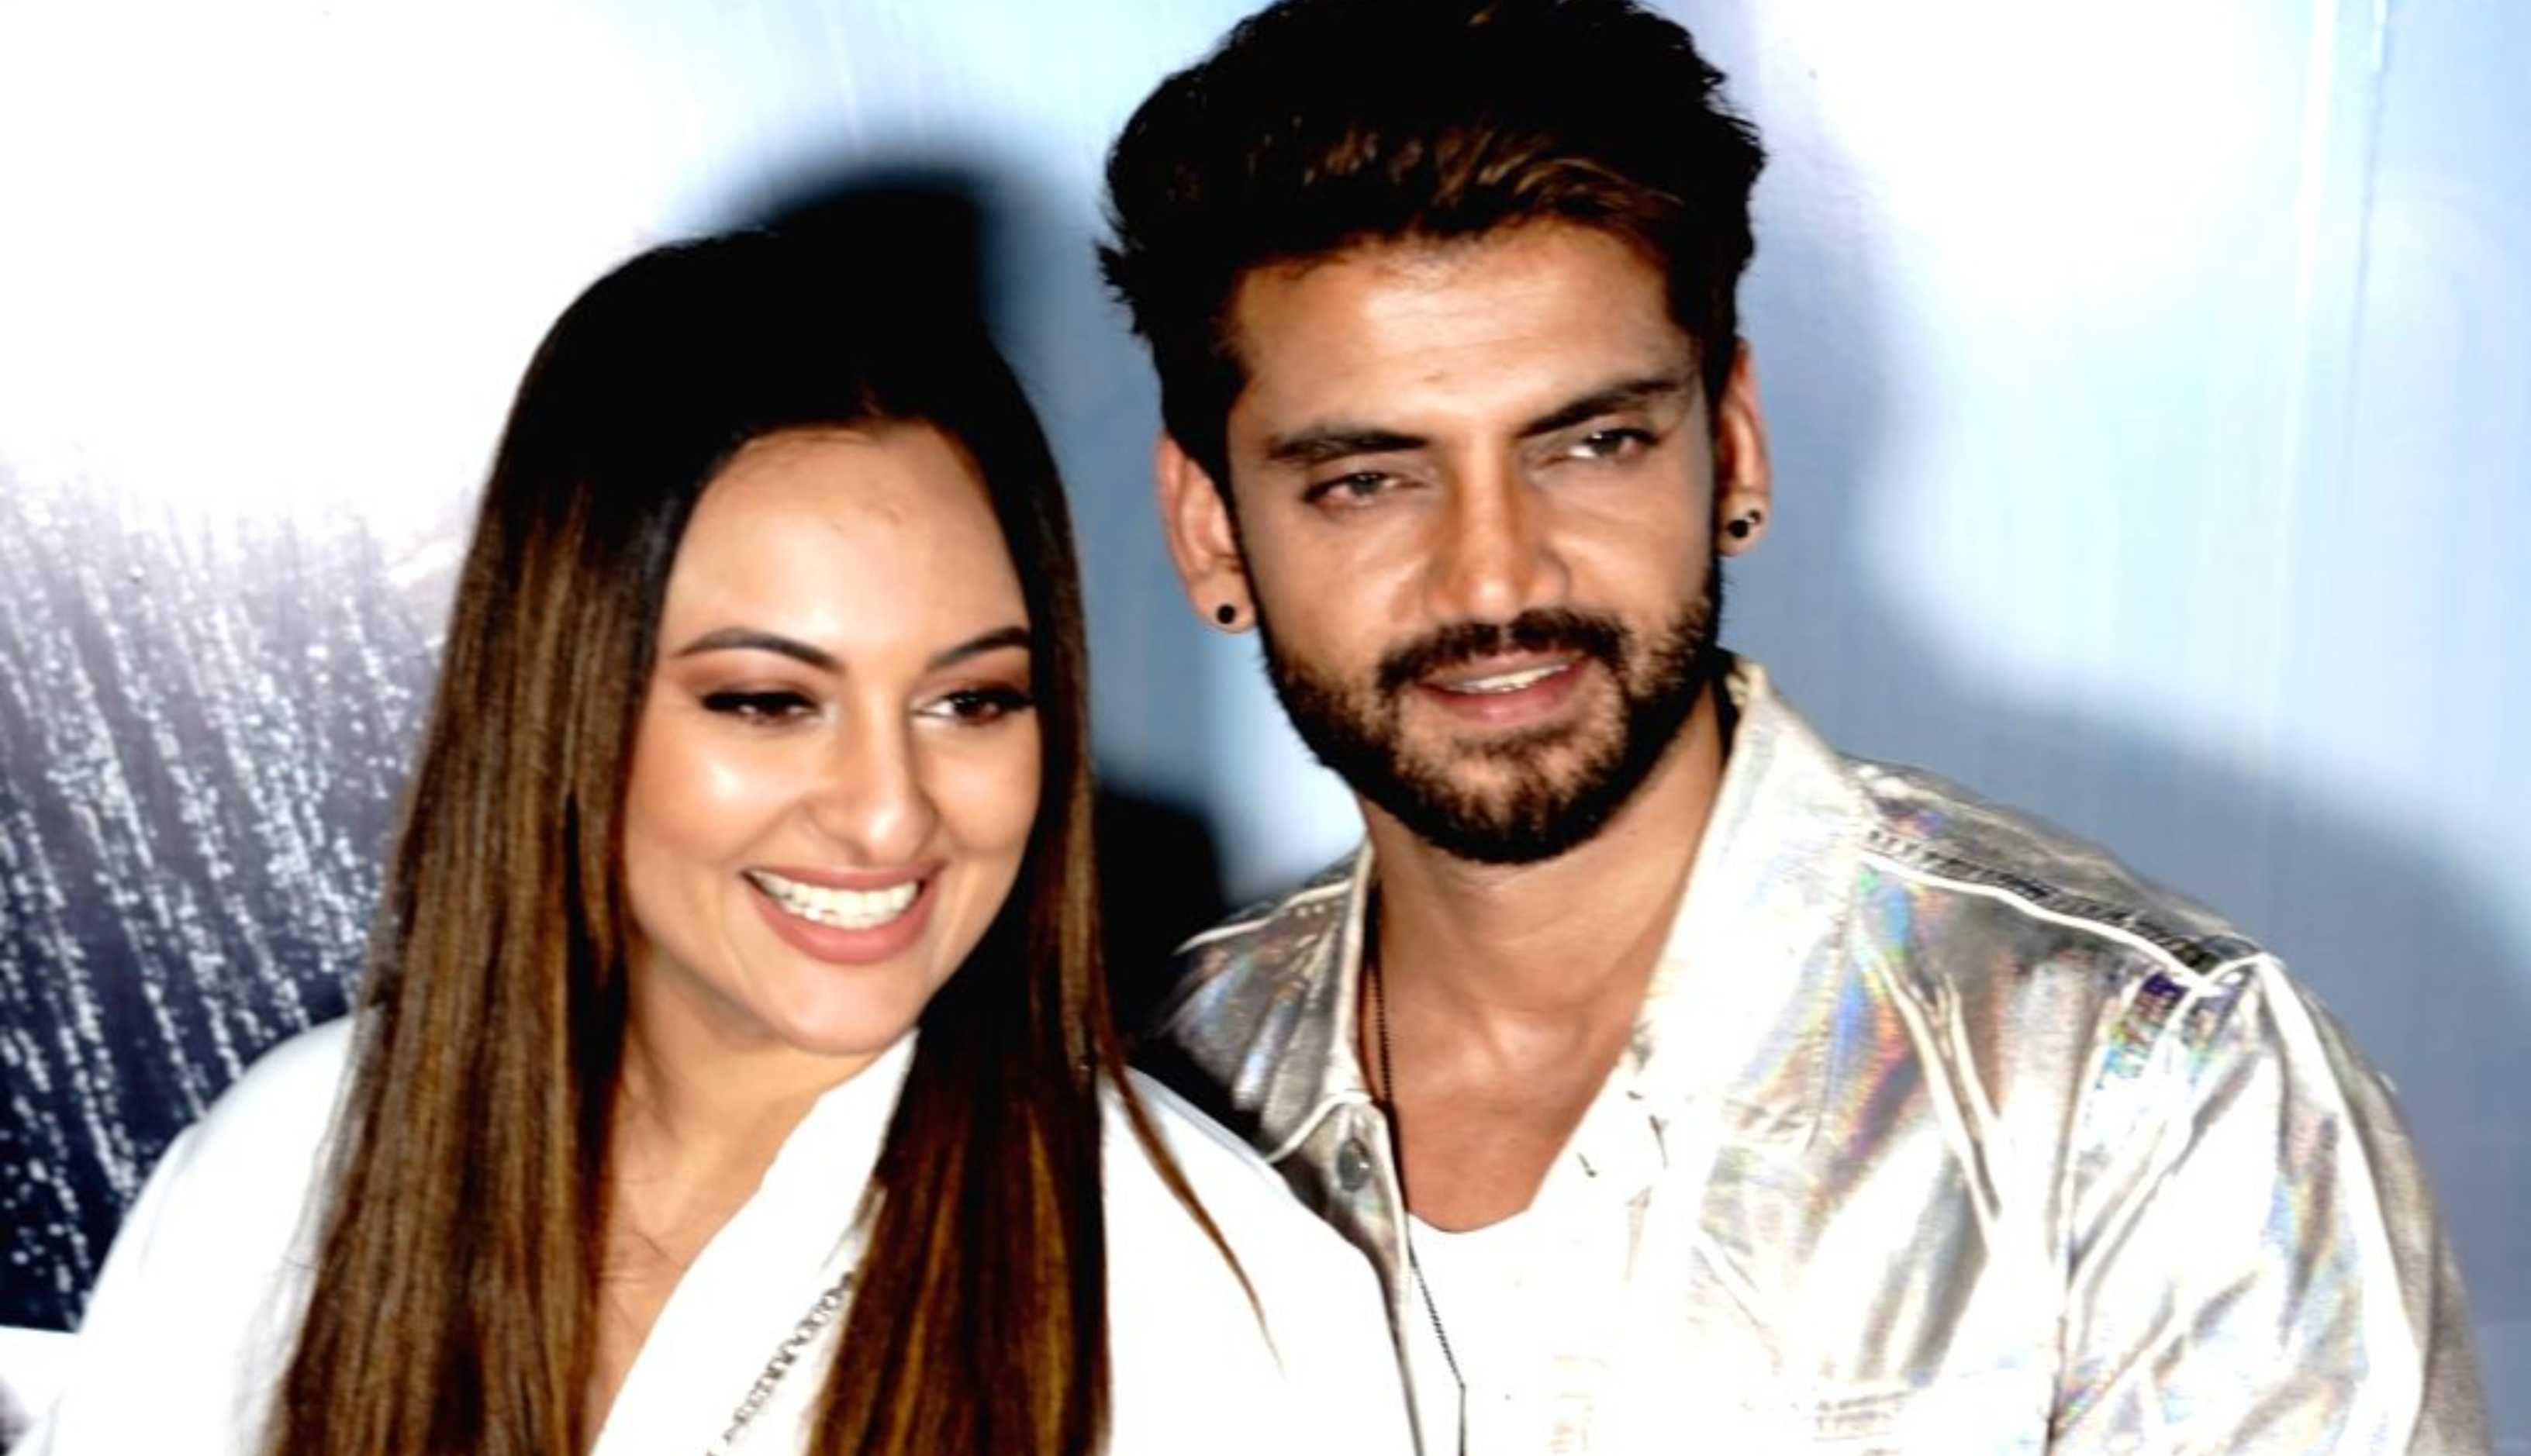 Sonakshi Sinha swiftly avoids talking about rumored beau Zaheer Iqbal; latter shares clarity on their relationship